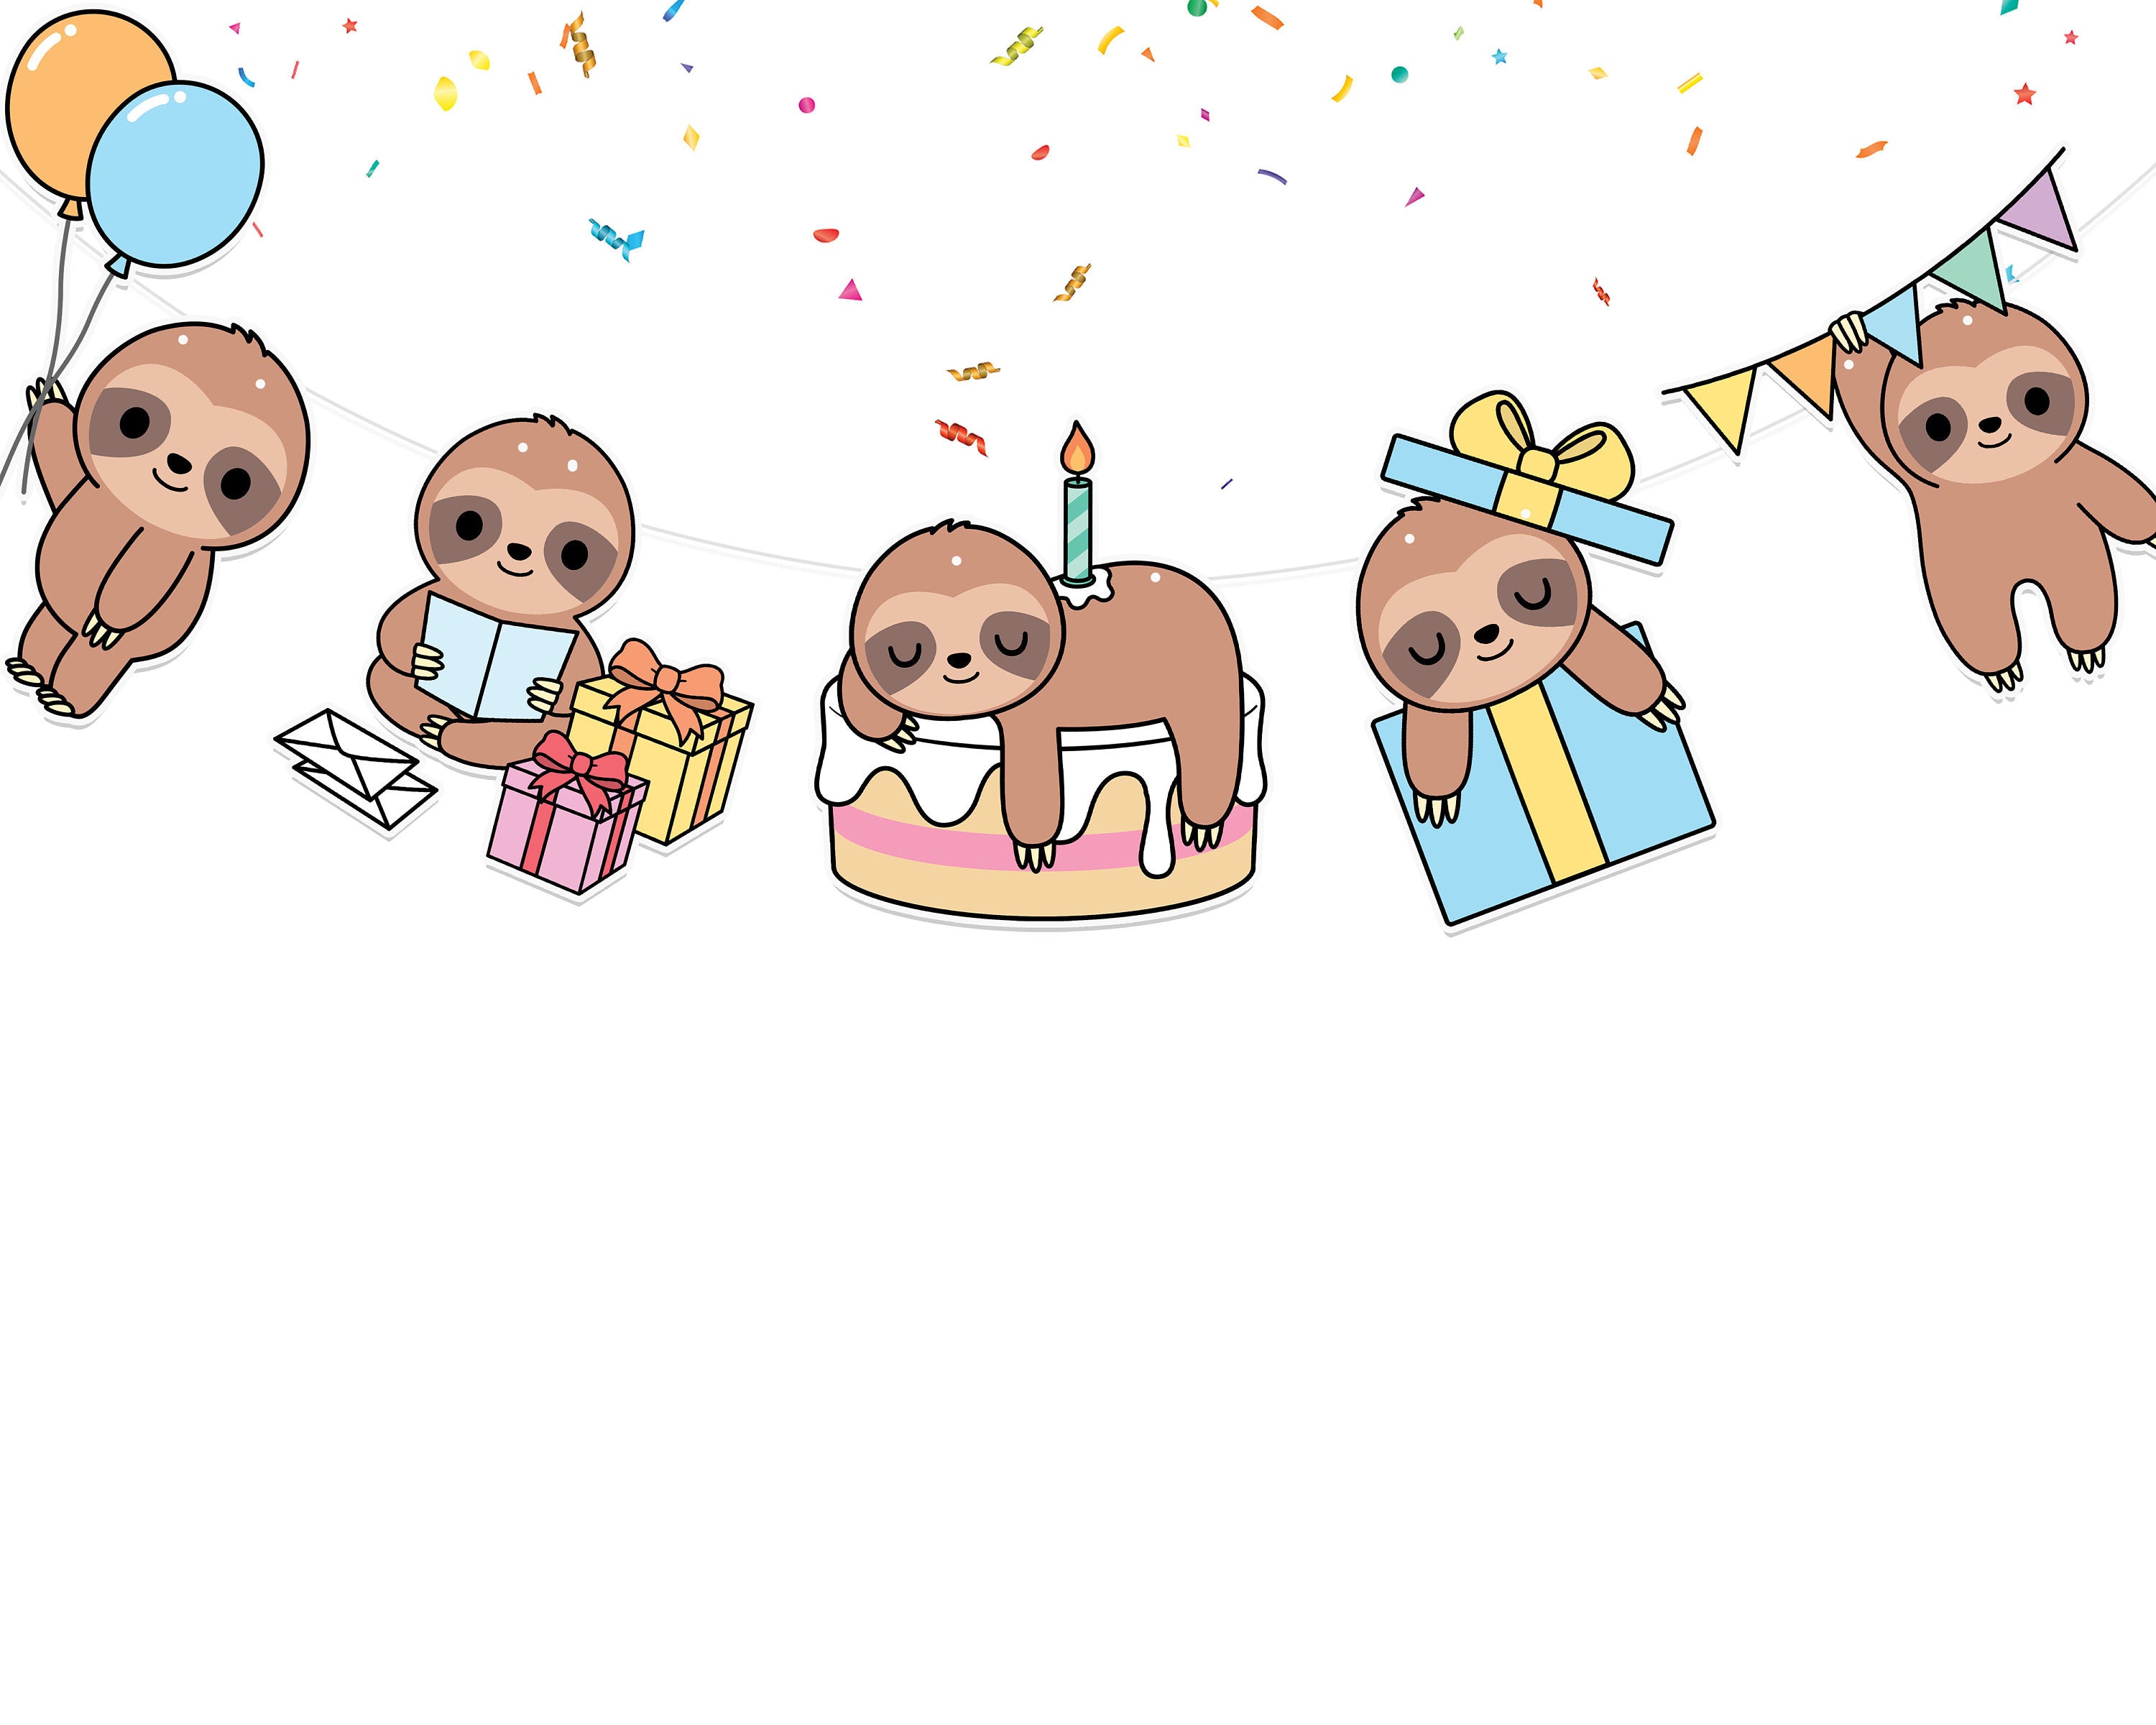 Cheerful Sloth Party Cartoon Banner - Adorable Celebration Decor for All Ages